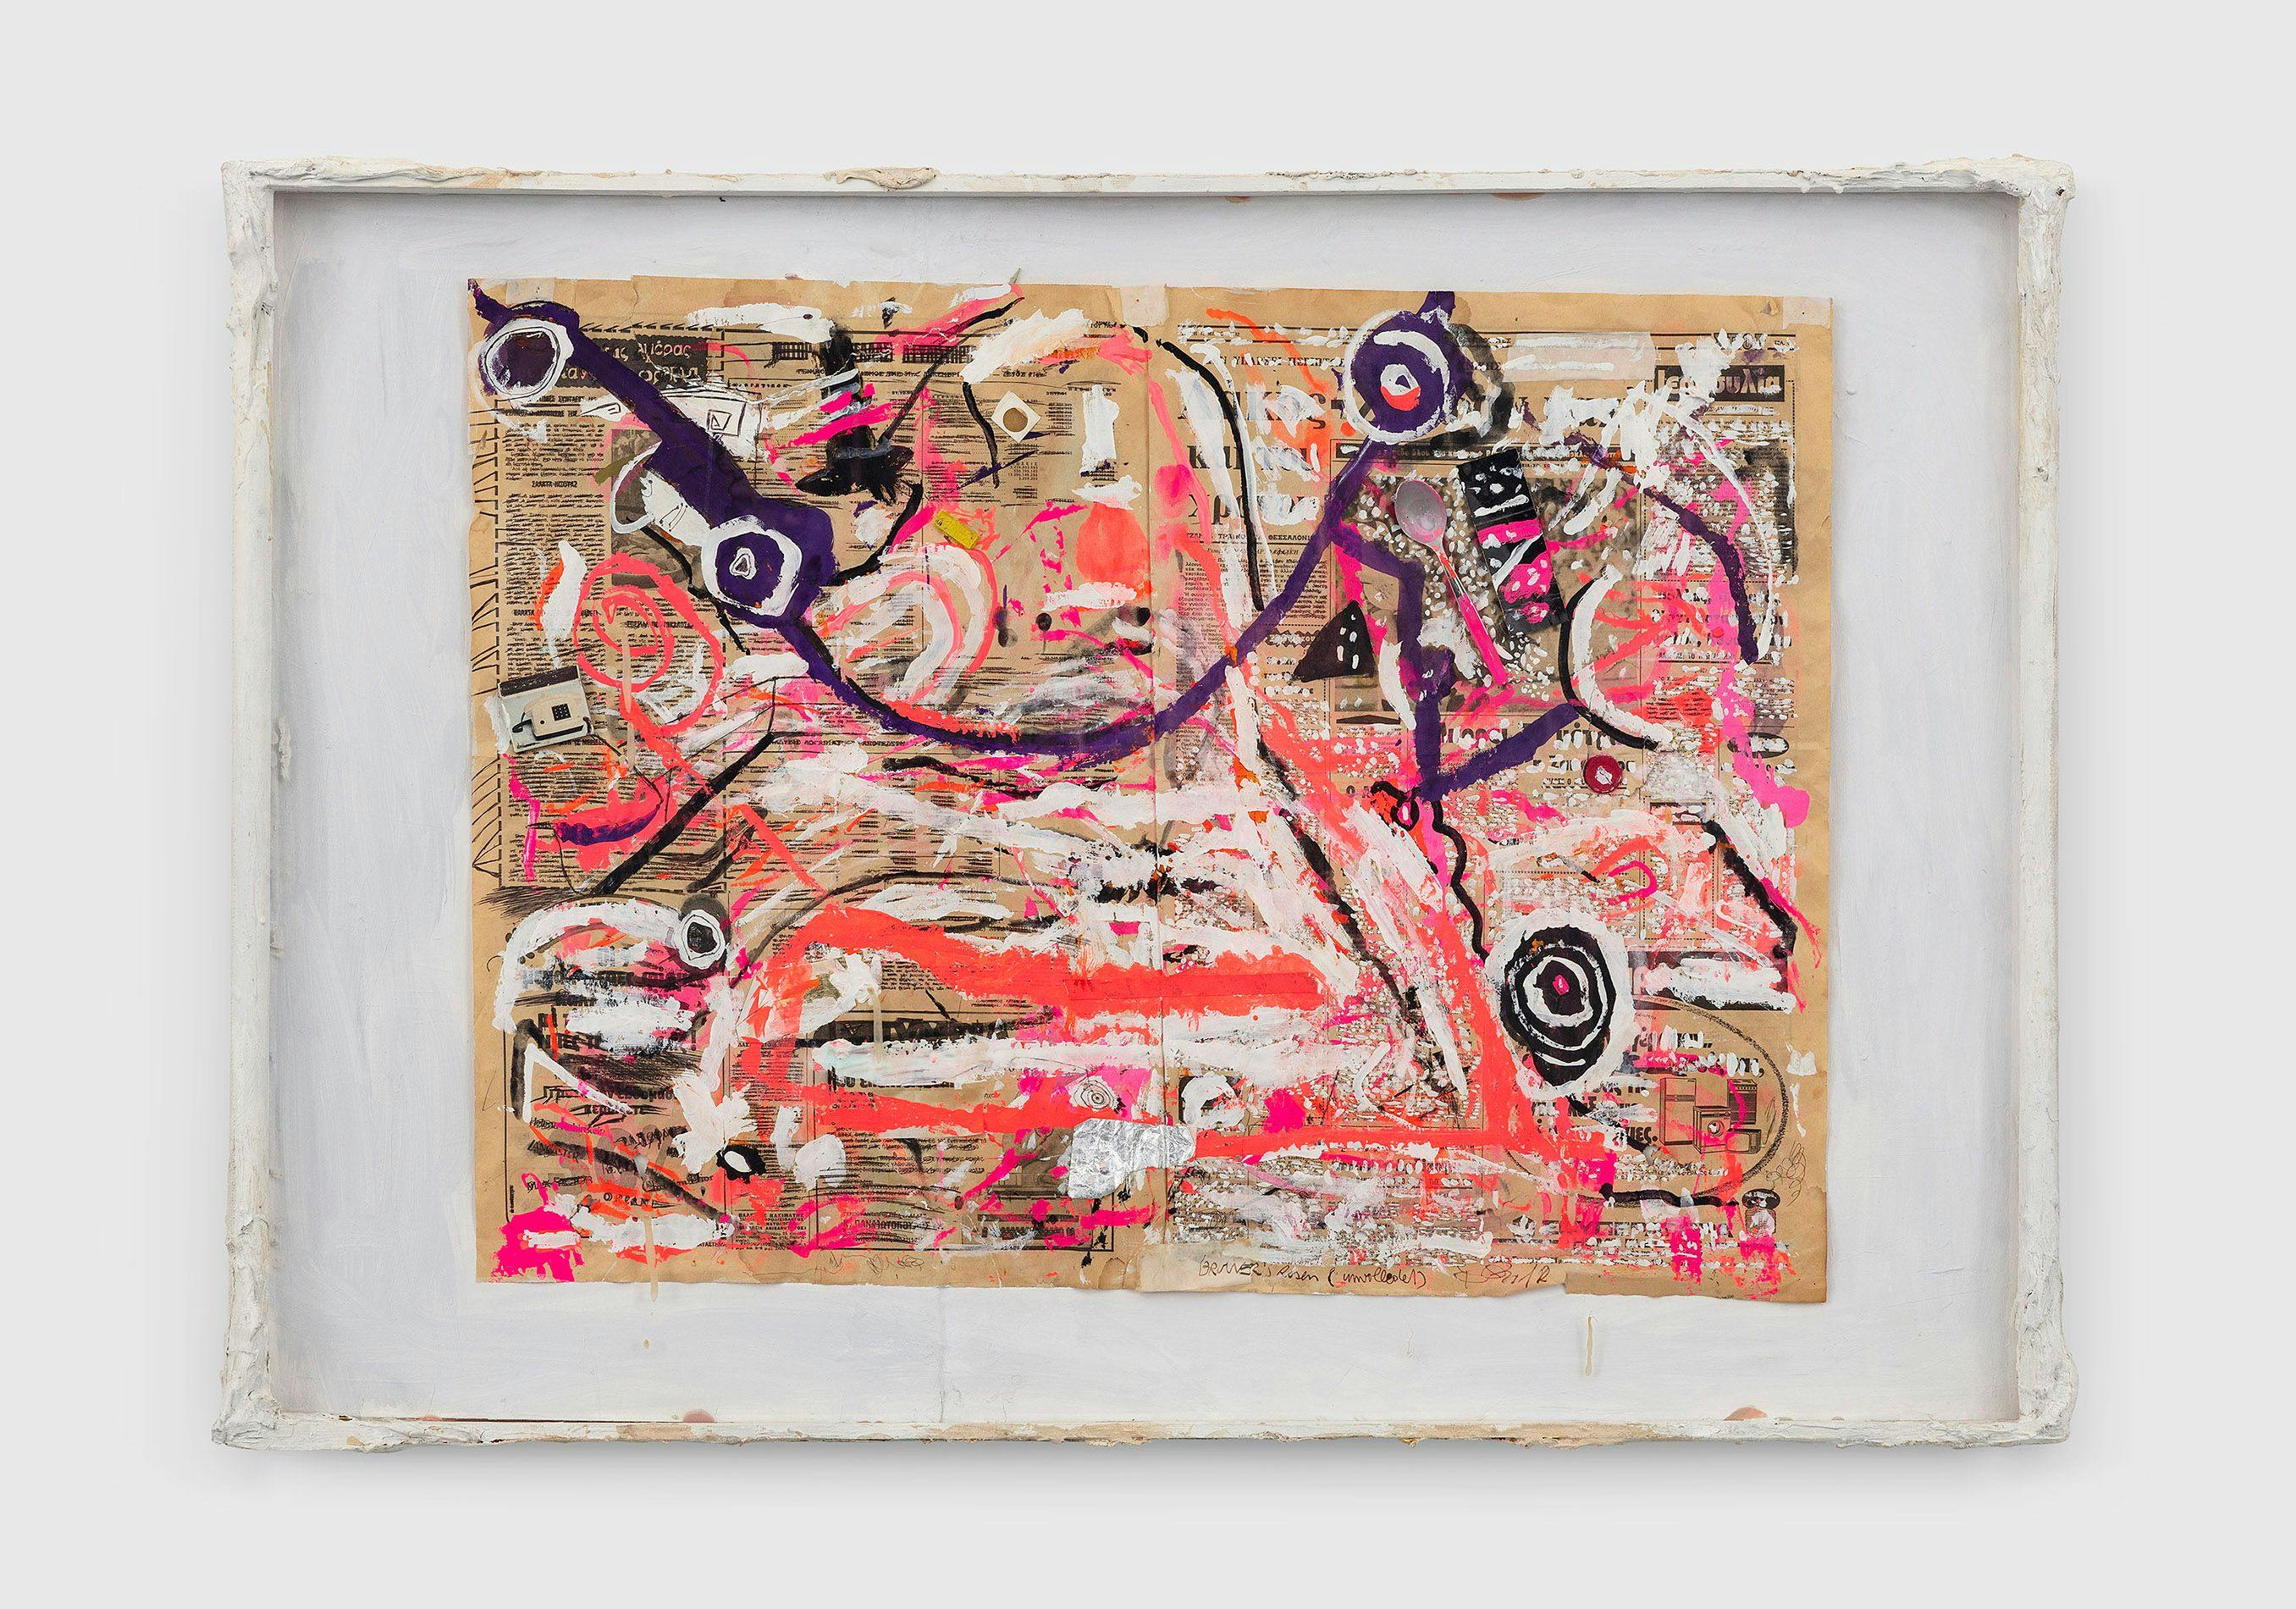 A work on paper by Franz West, titled Brower's Rosen (unvollendet) (Brower's Roses [uncompleted]), dated 1982.